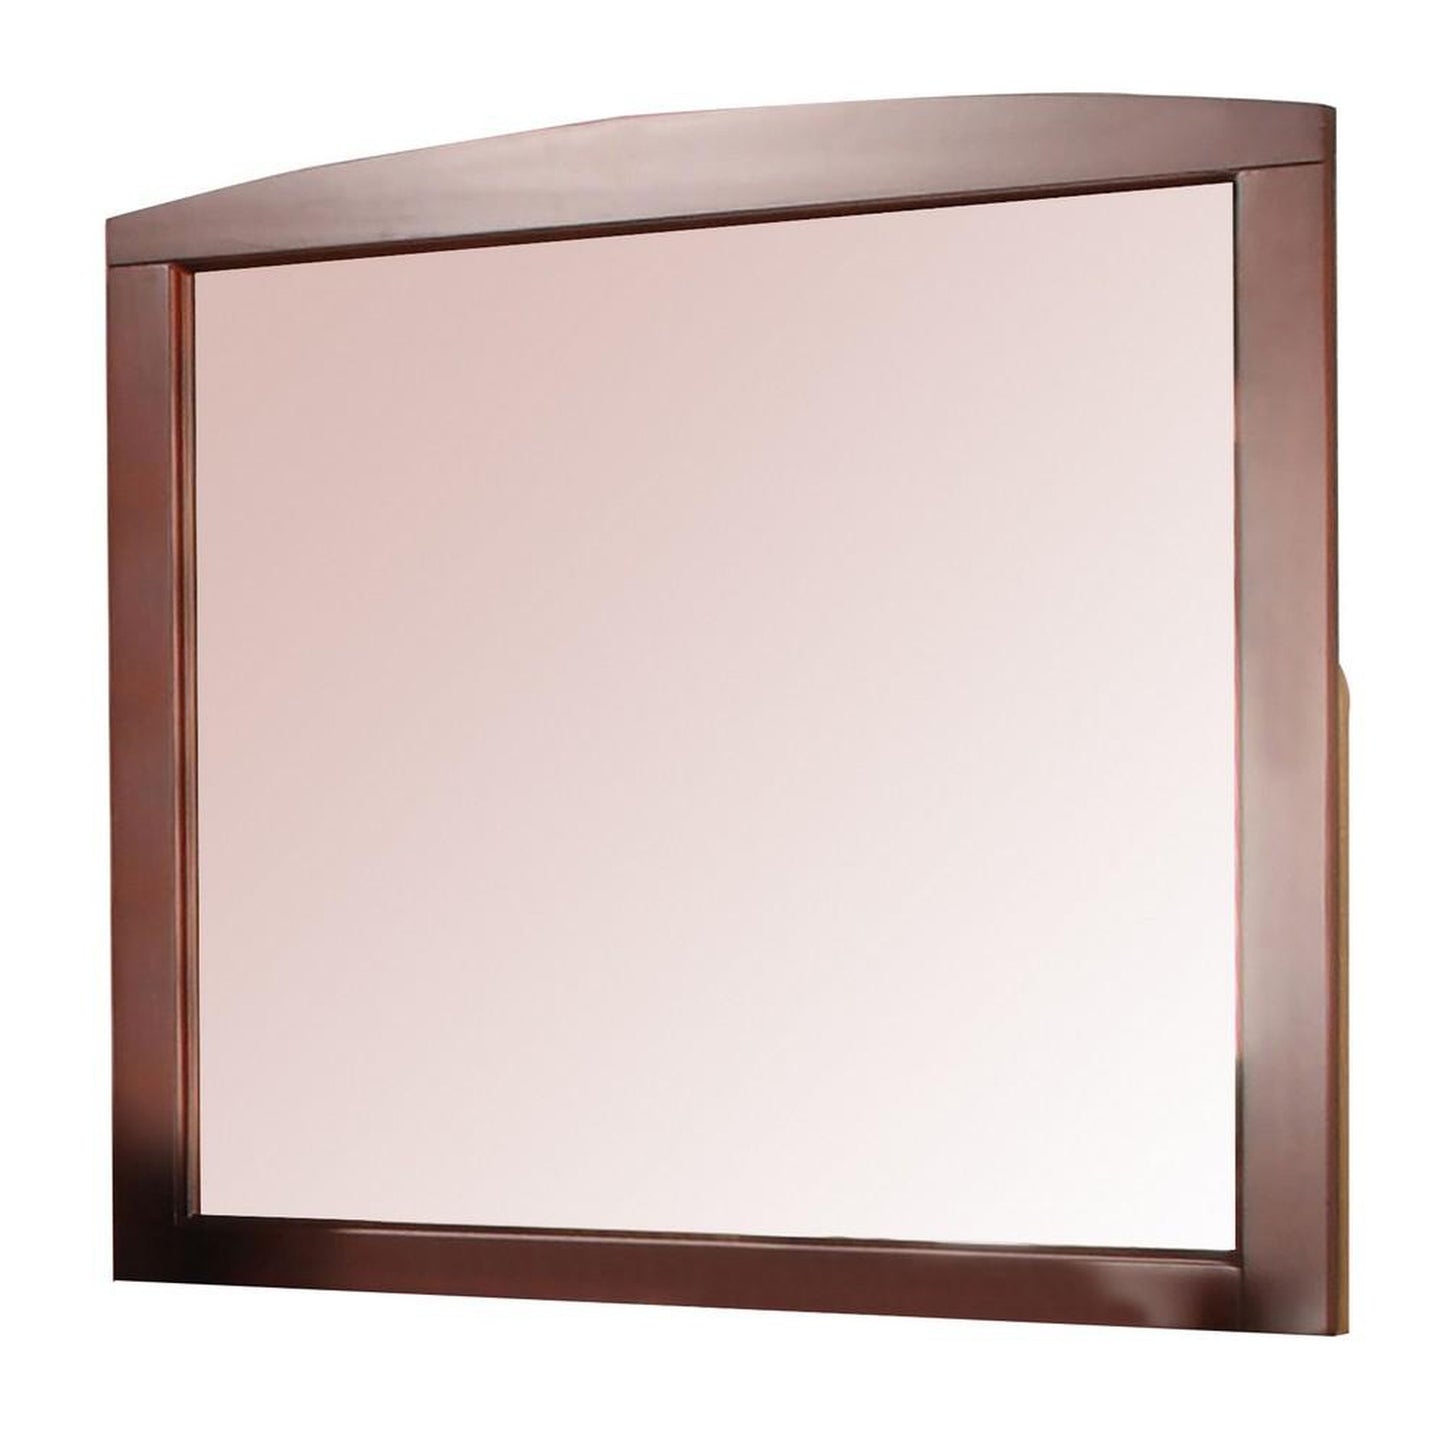 Benzara 36" Rectangular Brown Wooden Framed Wall Mirror With Slightly Arched Top